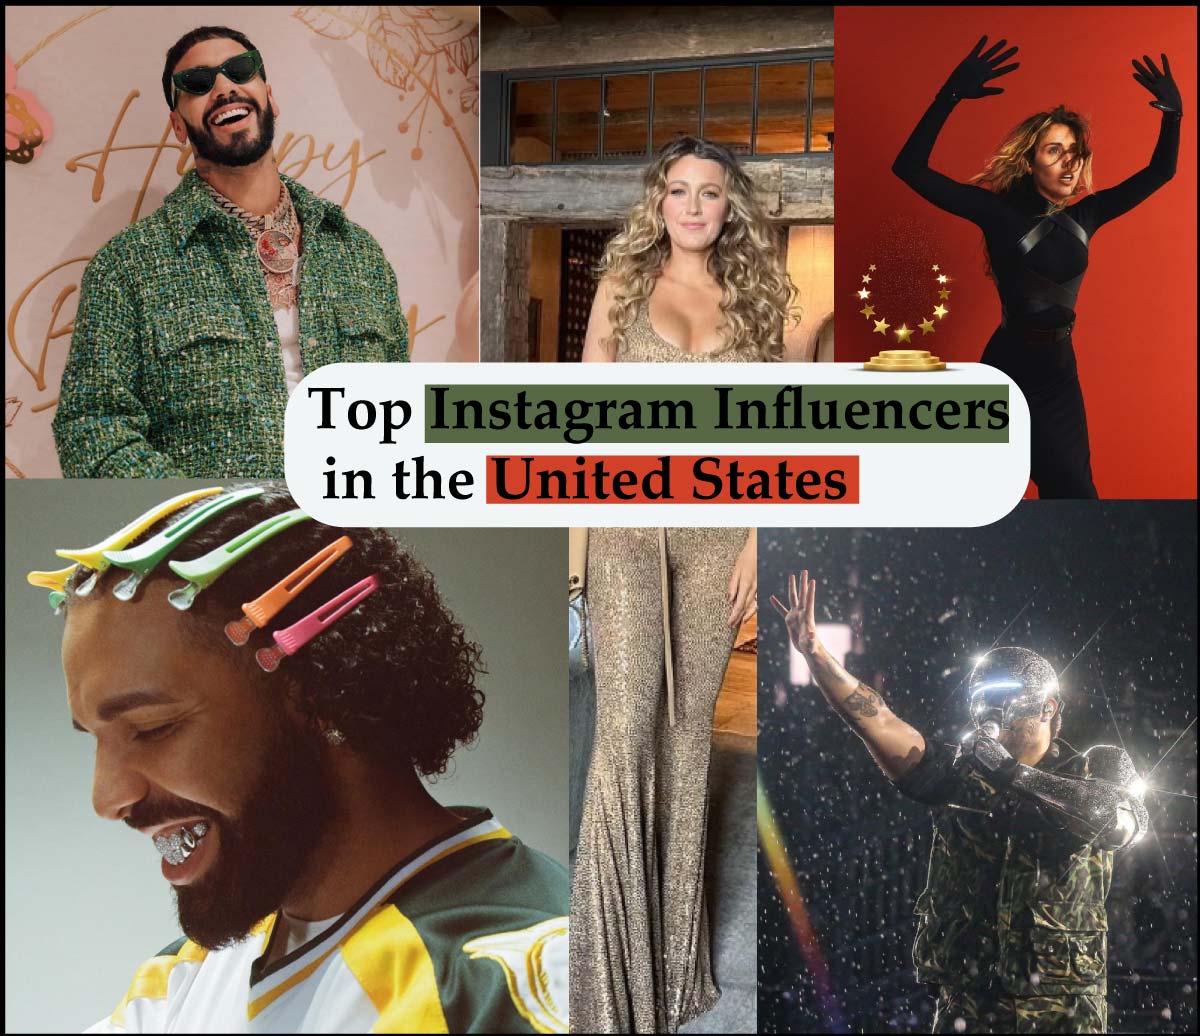 Top Instagram Influencers in the United States